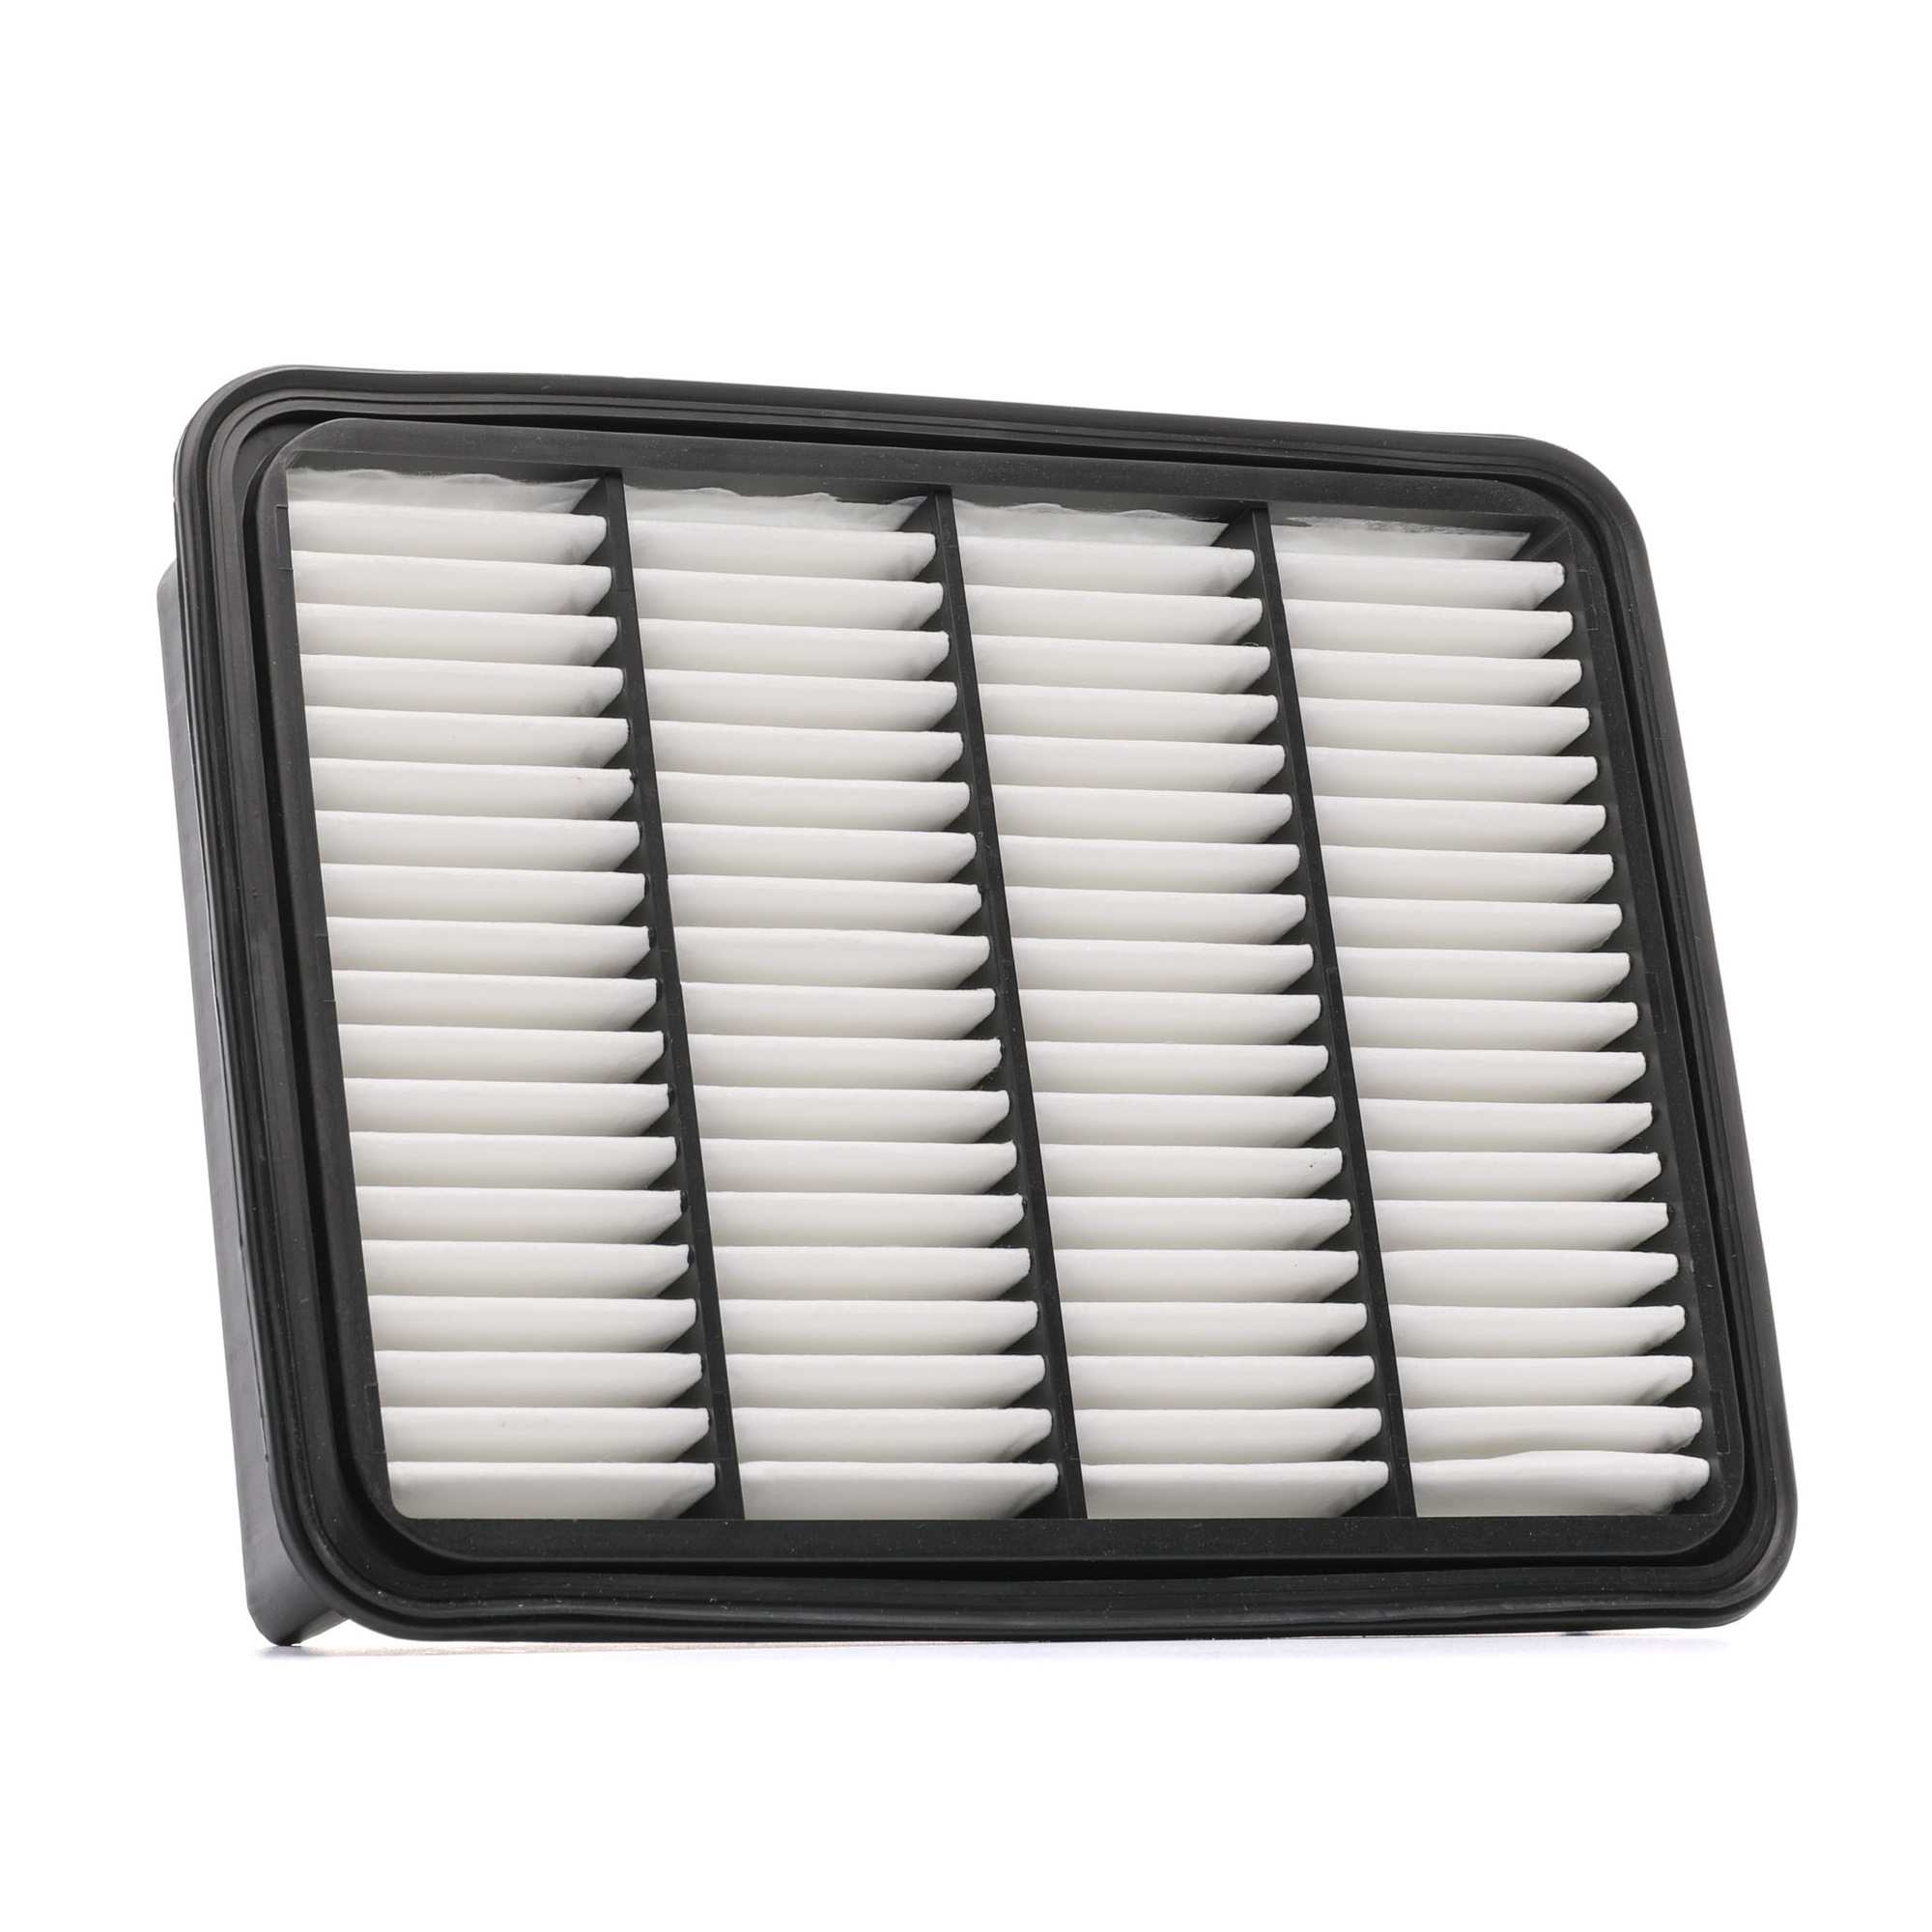 Ford MONDEO Engine air filter 18744434 RIDEX PLUS 8A0069P online buy